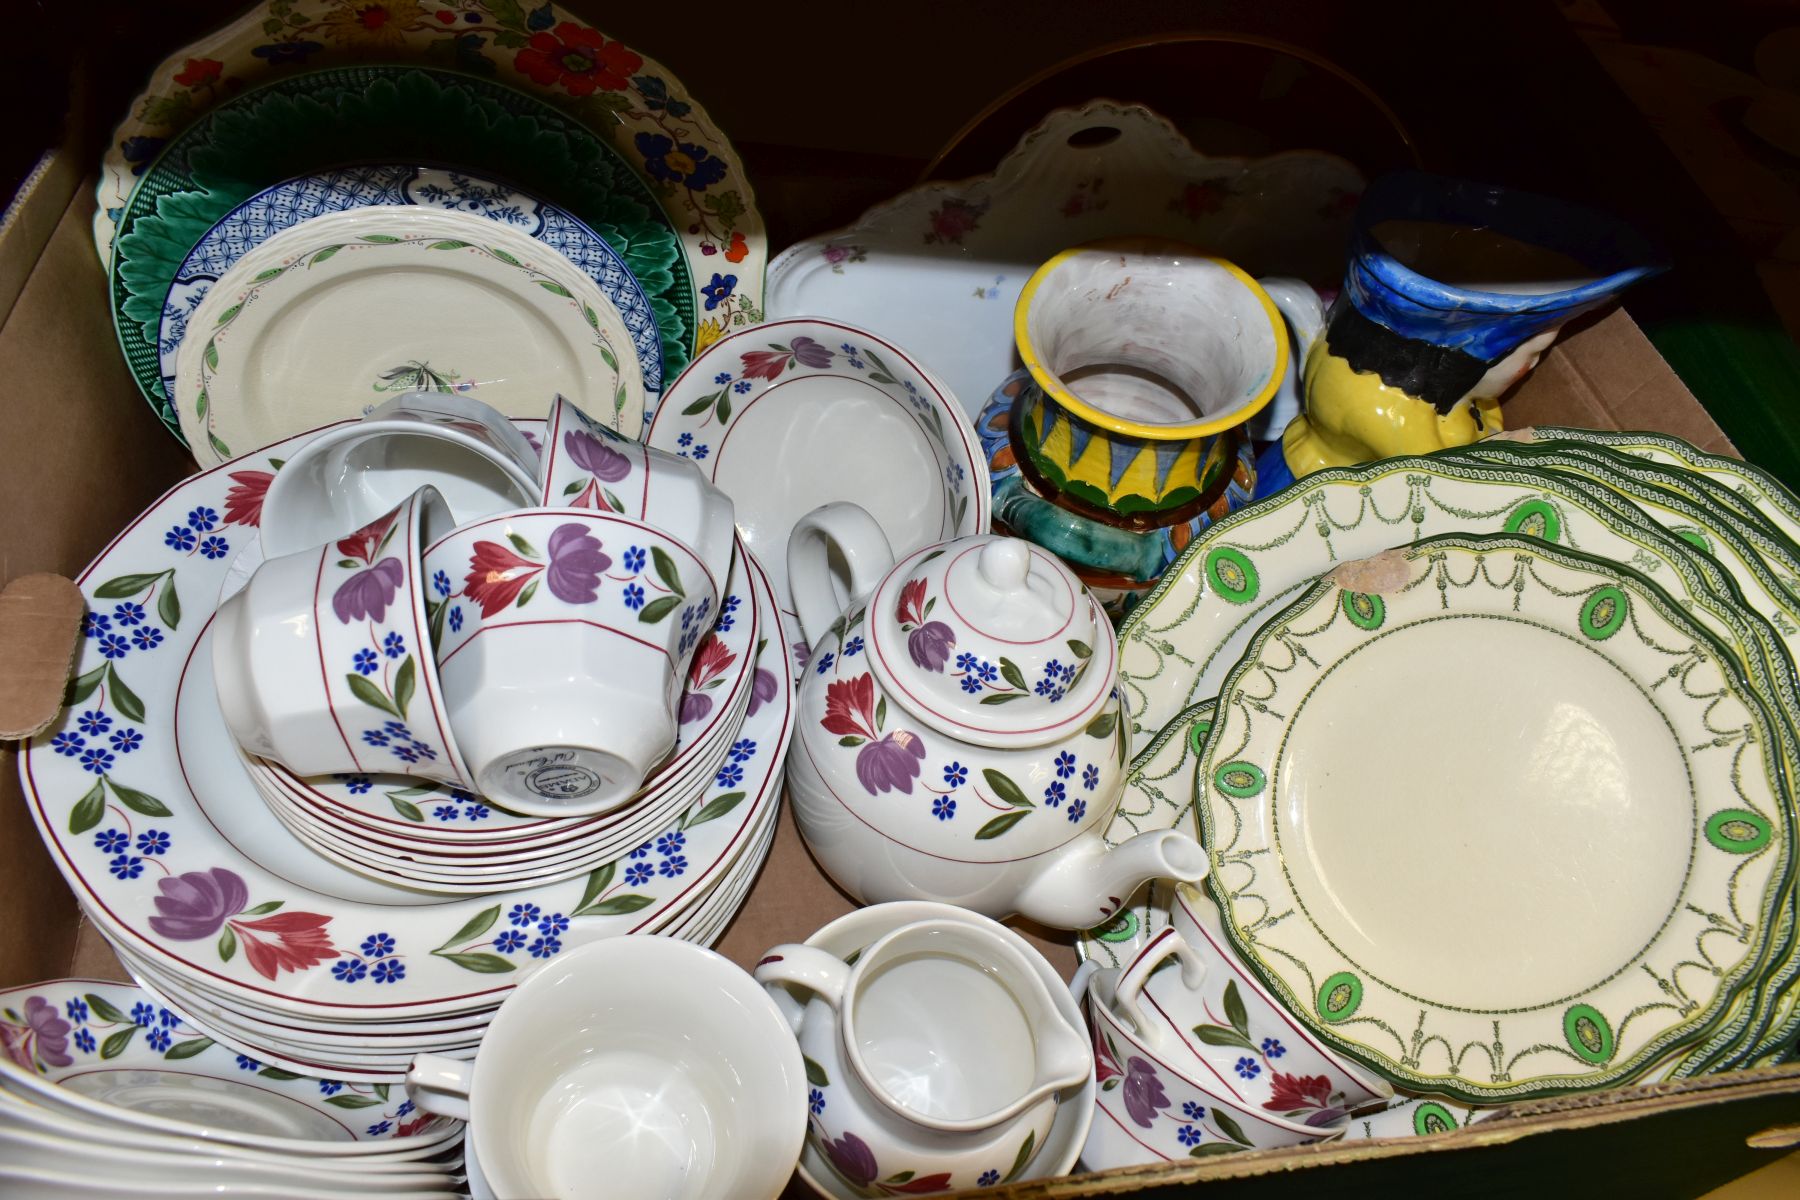 FIVE BOXES OF ART DECO DINNER SERVICE, CERAMICS, GLASS, METALWARES, MINIATURE BOTTLES AND SUNDRY - Image 13 of 16